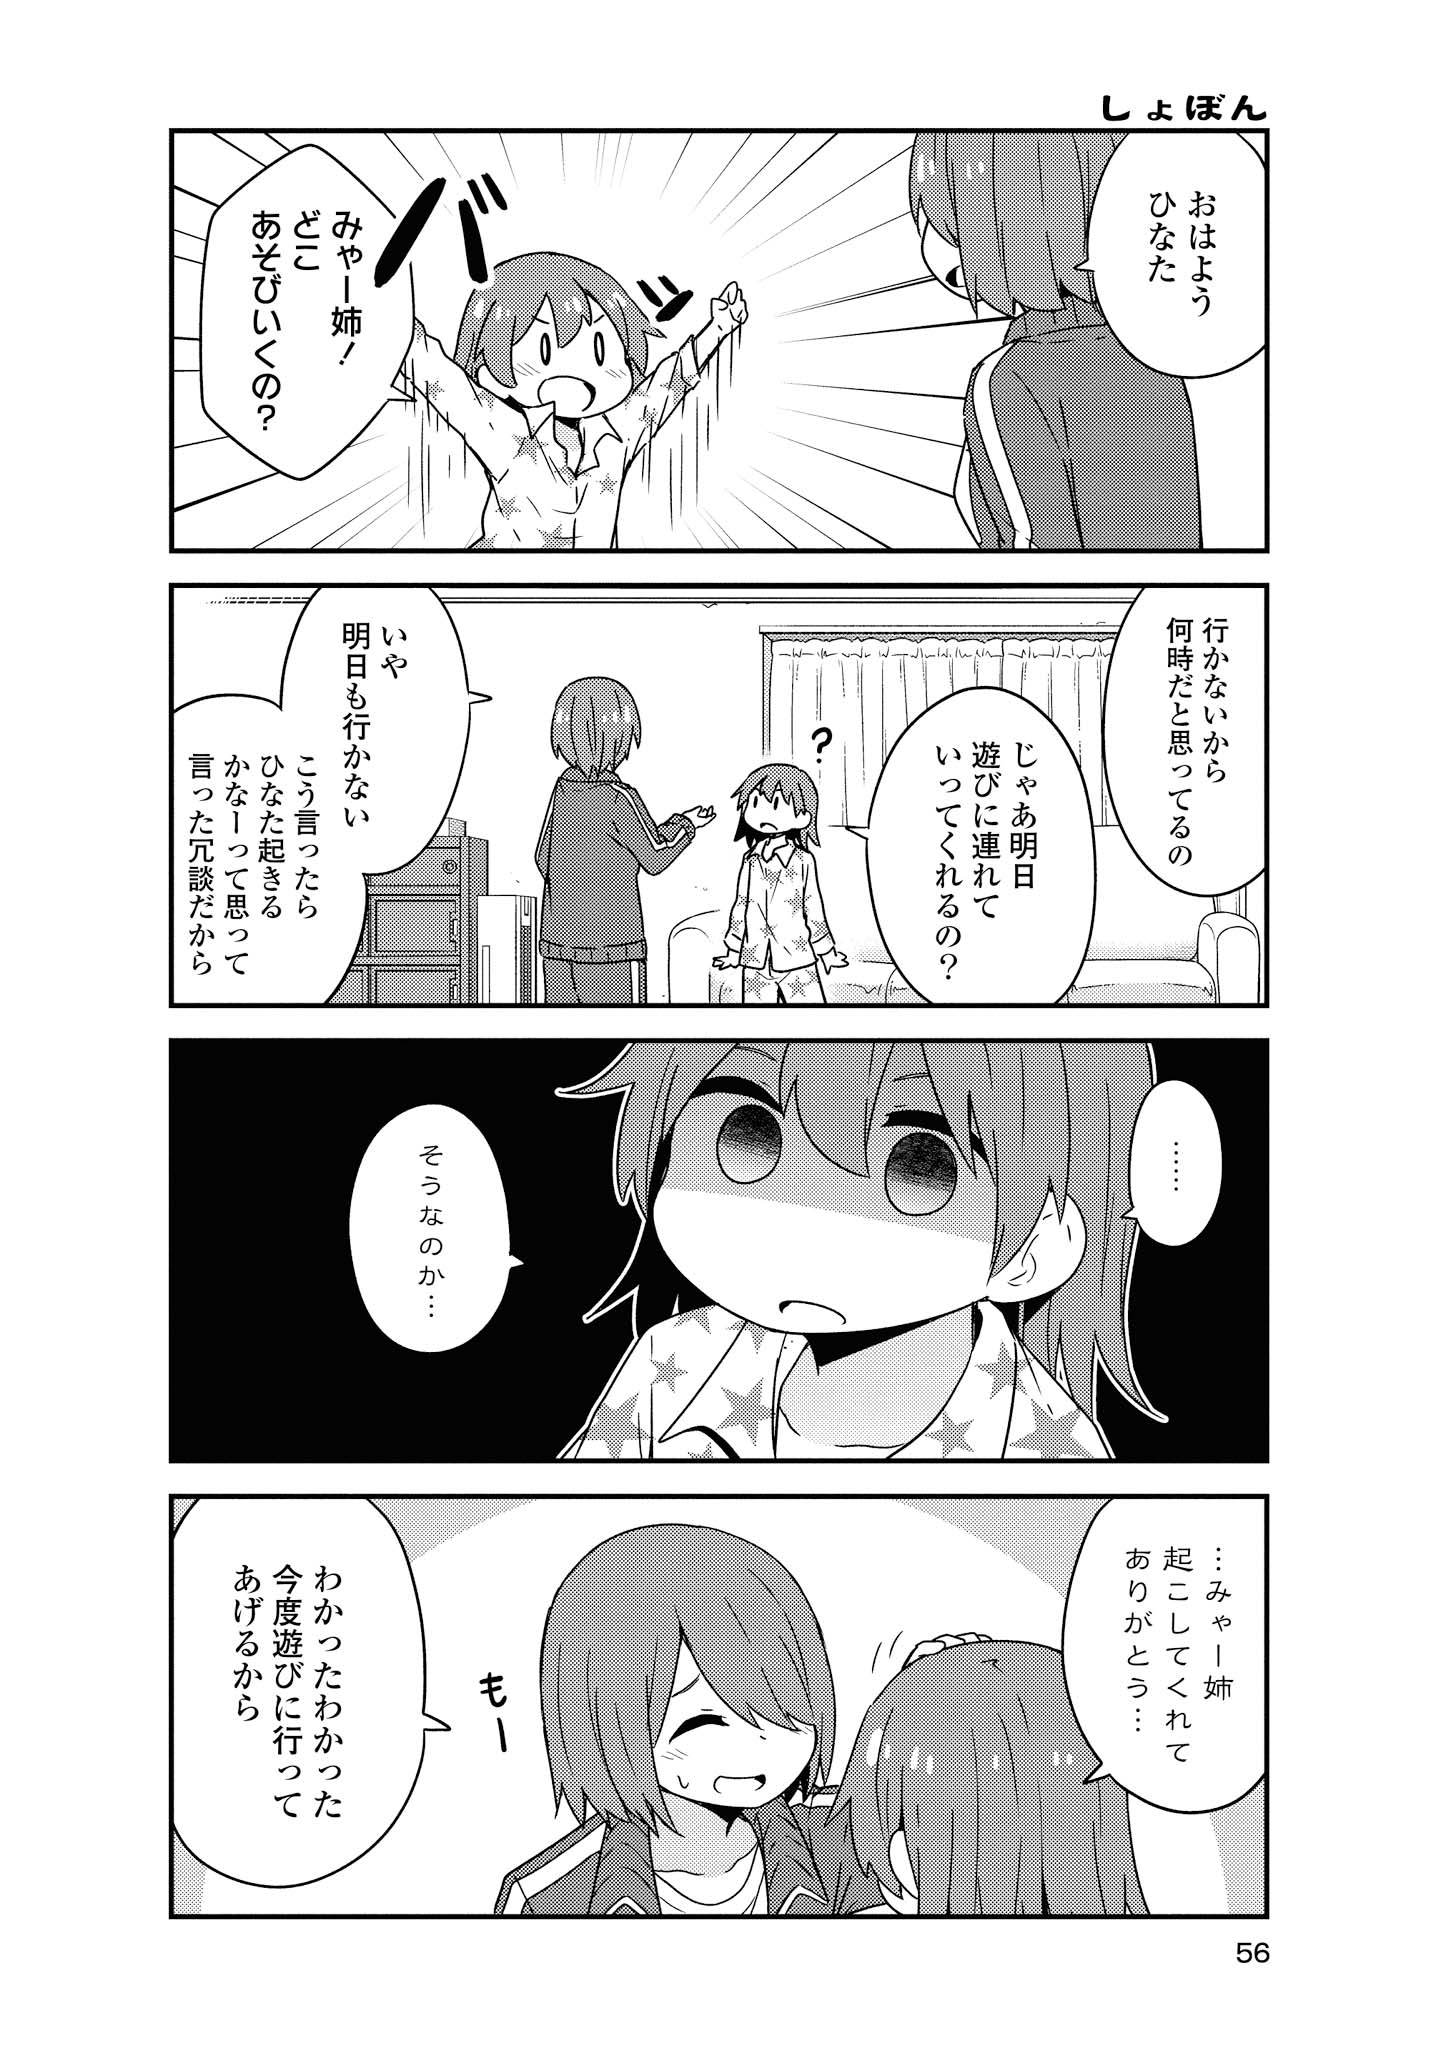 Wataten! An Angel Flew Down to Me 私に天使が舞い降りた！ 第46話 - Page 14